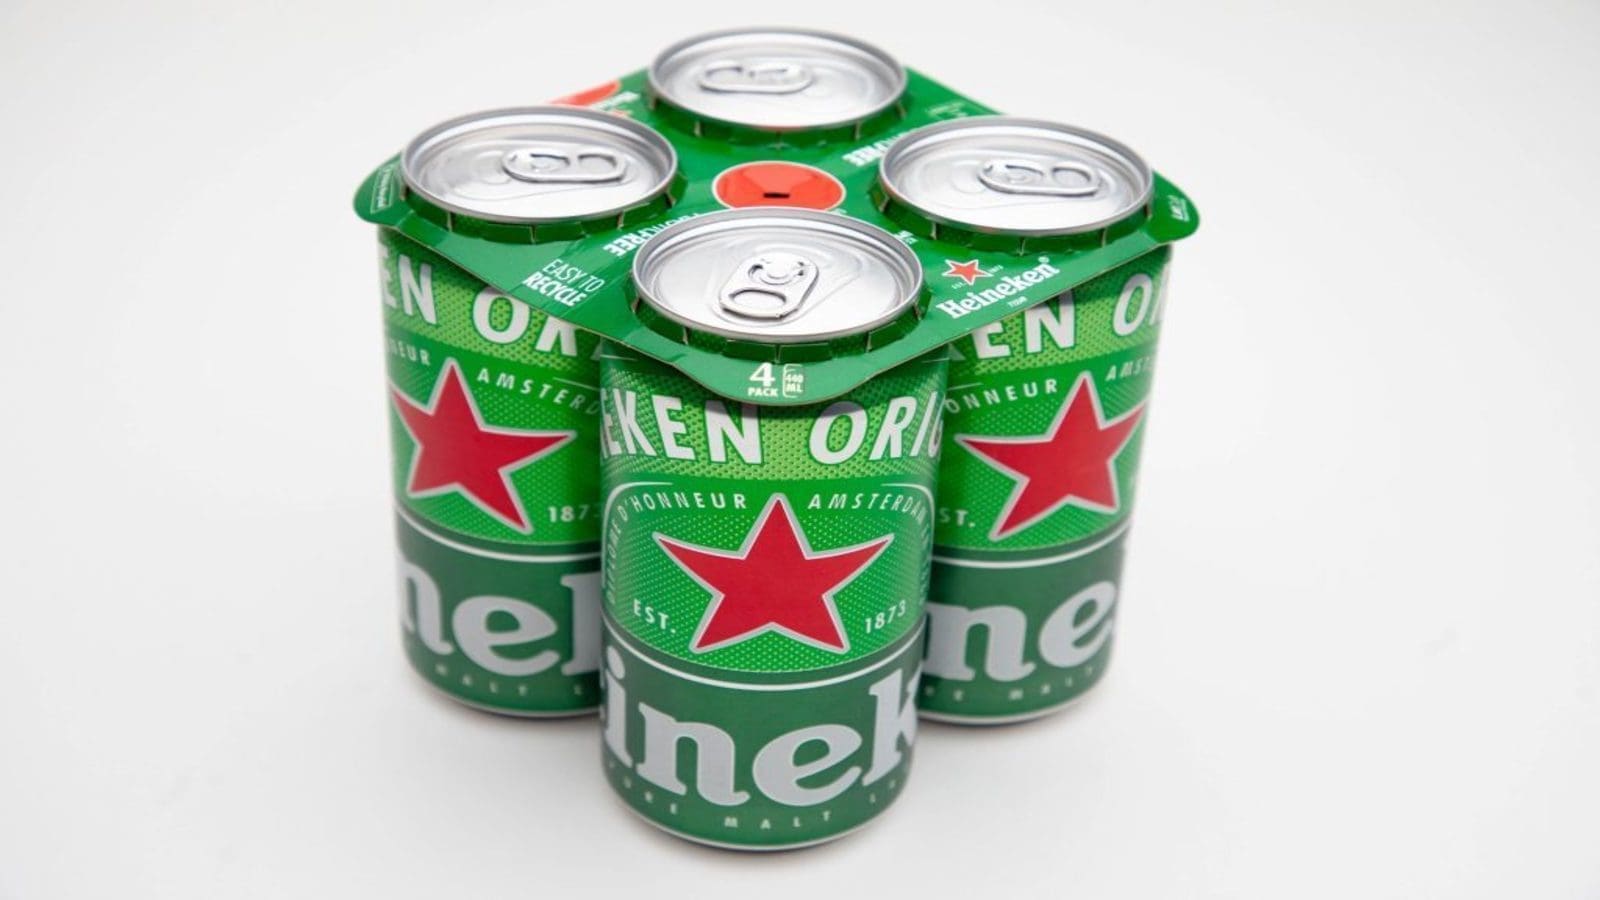 Dutch Government launches criminal investigation against Heineken over deposits cans rule